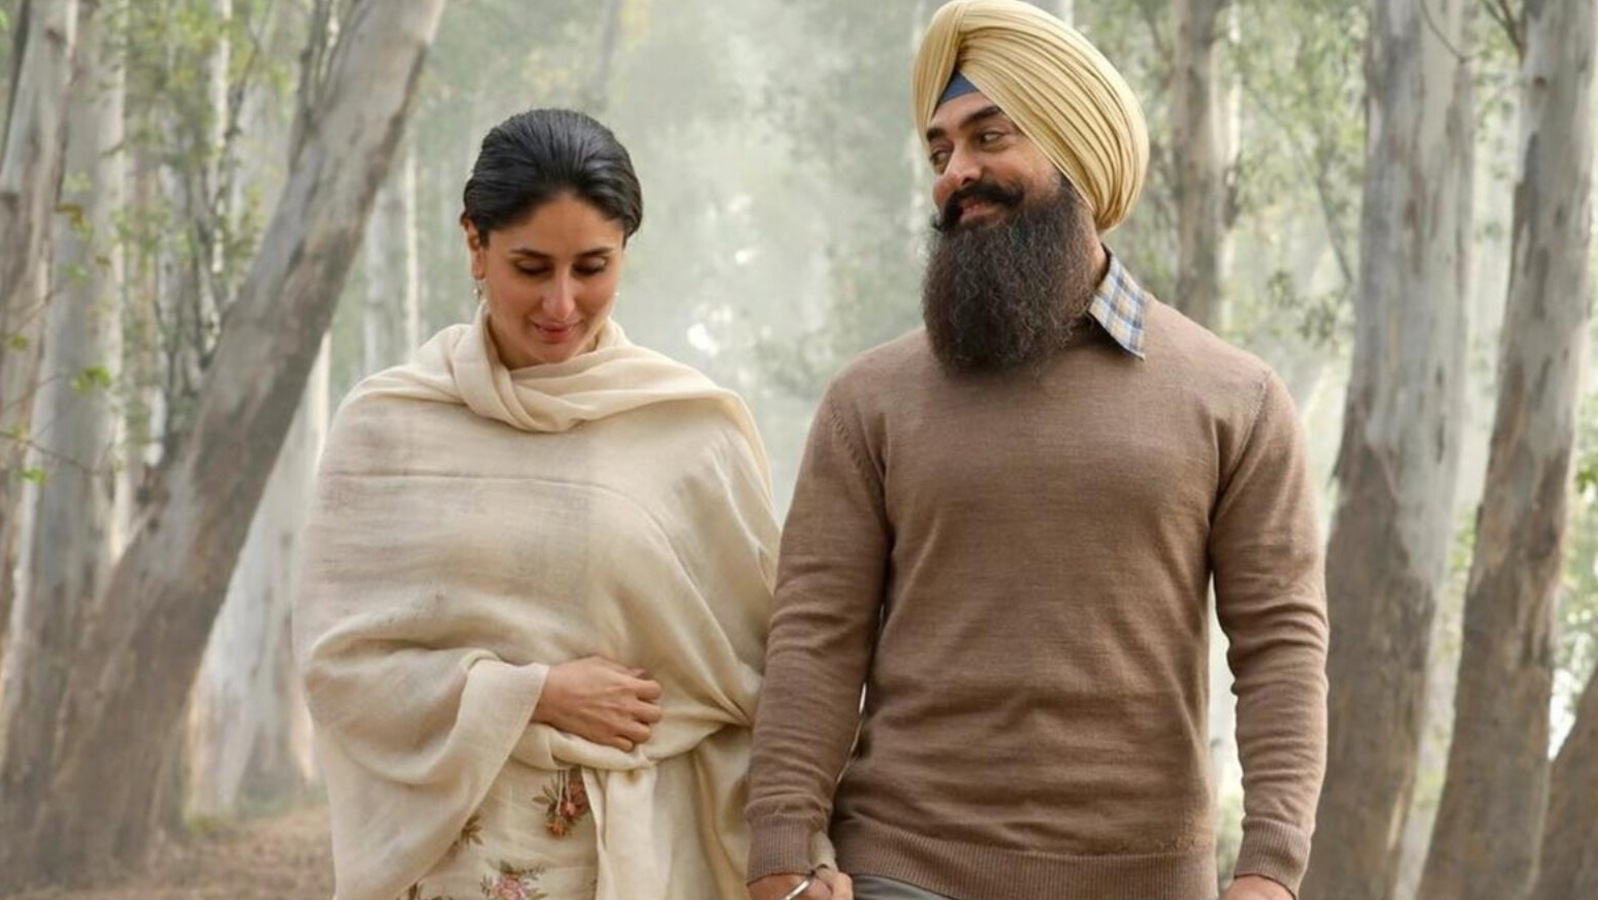 Laal Singh Chaddha box office: Aamir Khan’s film witnesses ‘insane drop’ on second weekend, earns only ₹4.65 crore